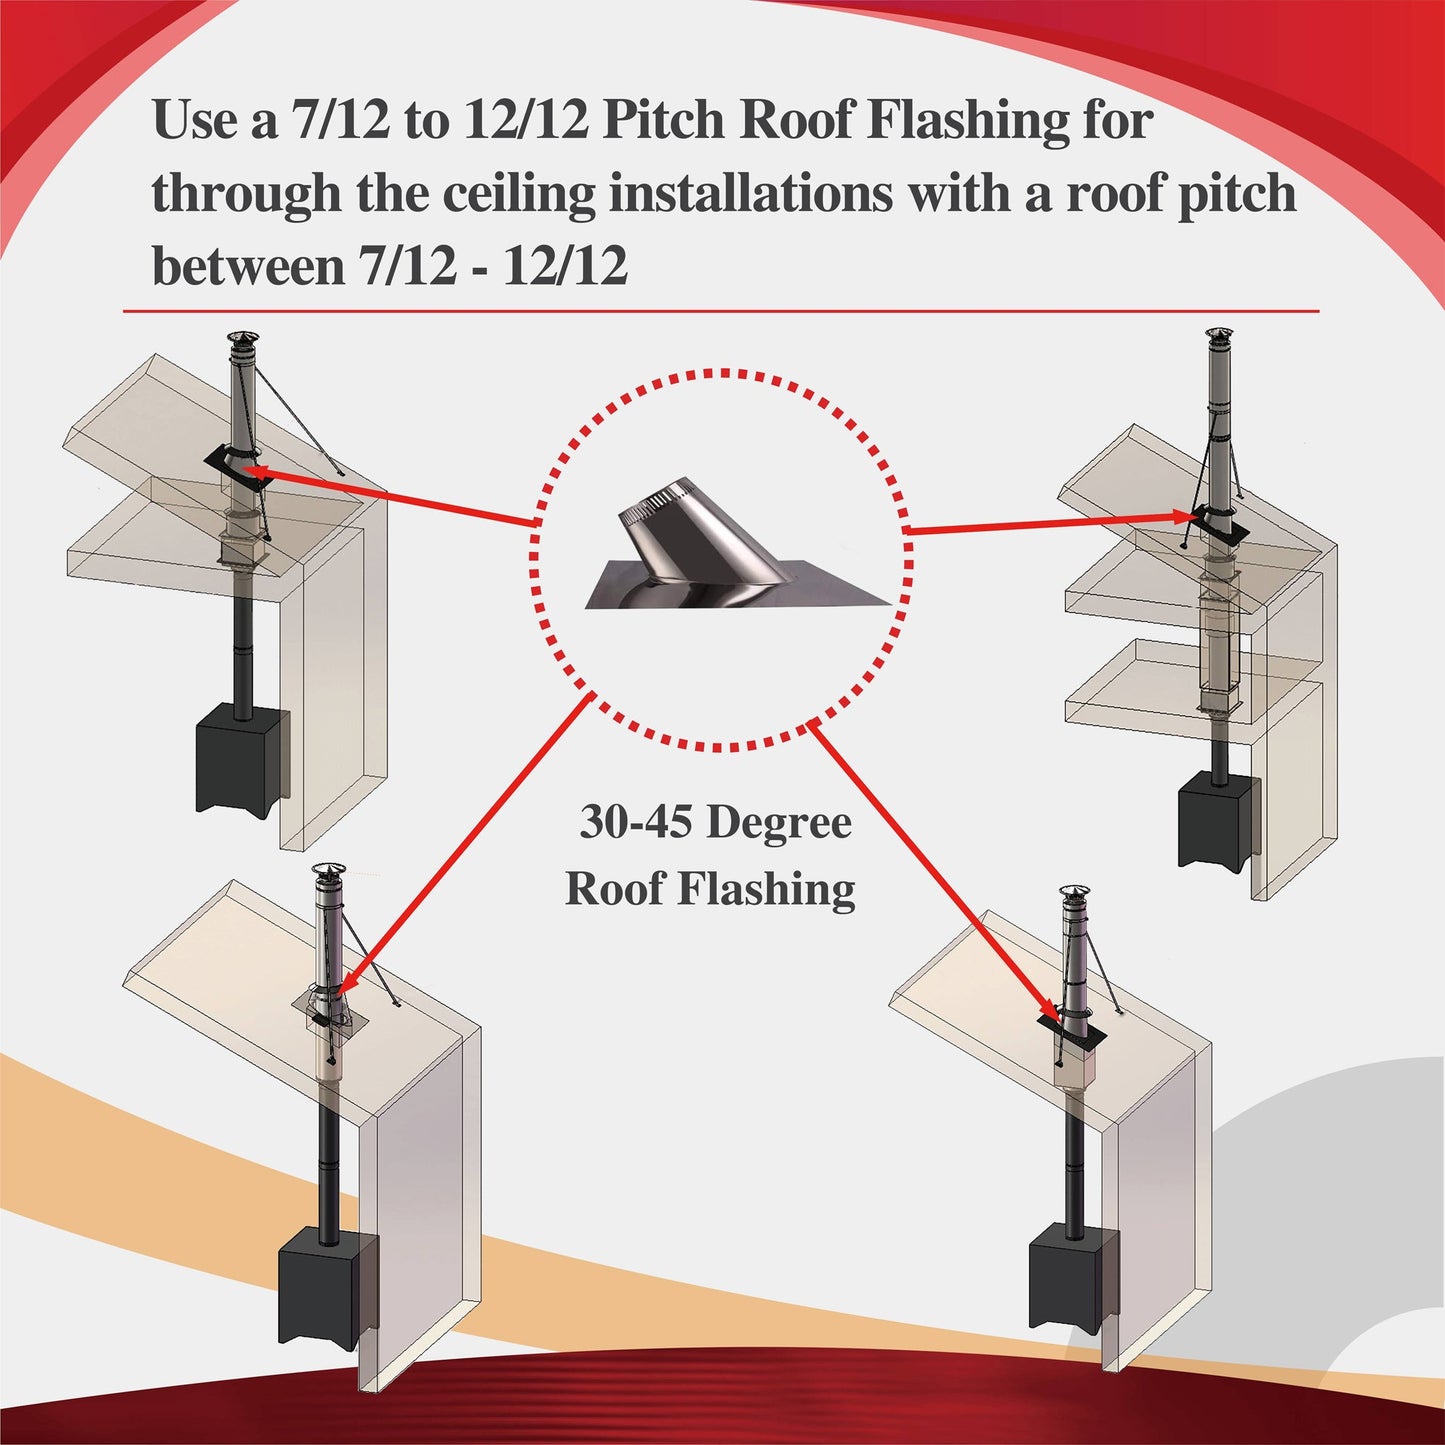 Pitch Roof Flashing 7/12 to 12/12 for 6" Inner Diameter Chimney Pipe